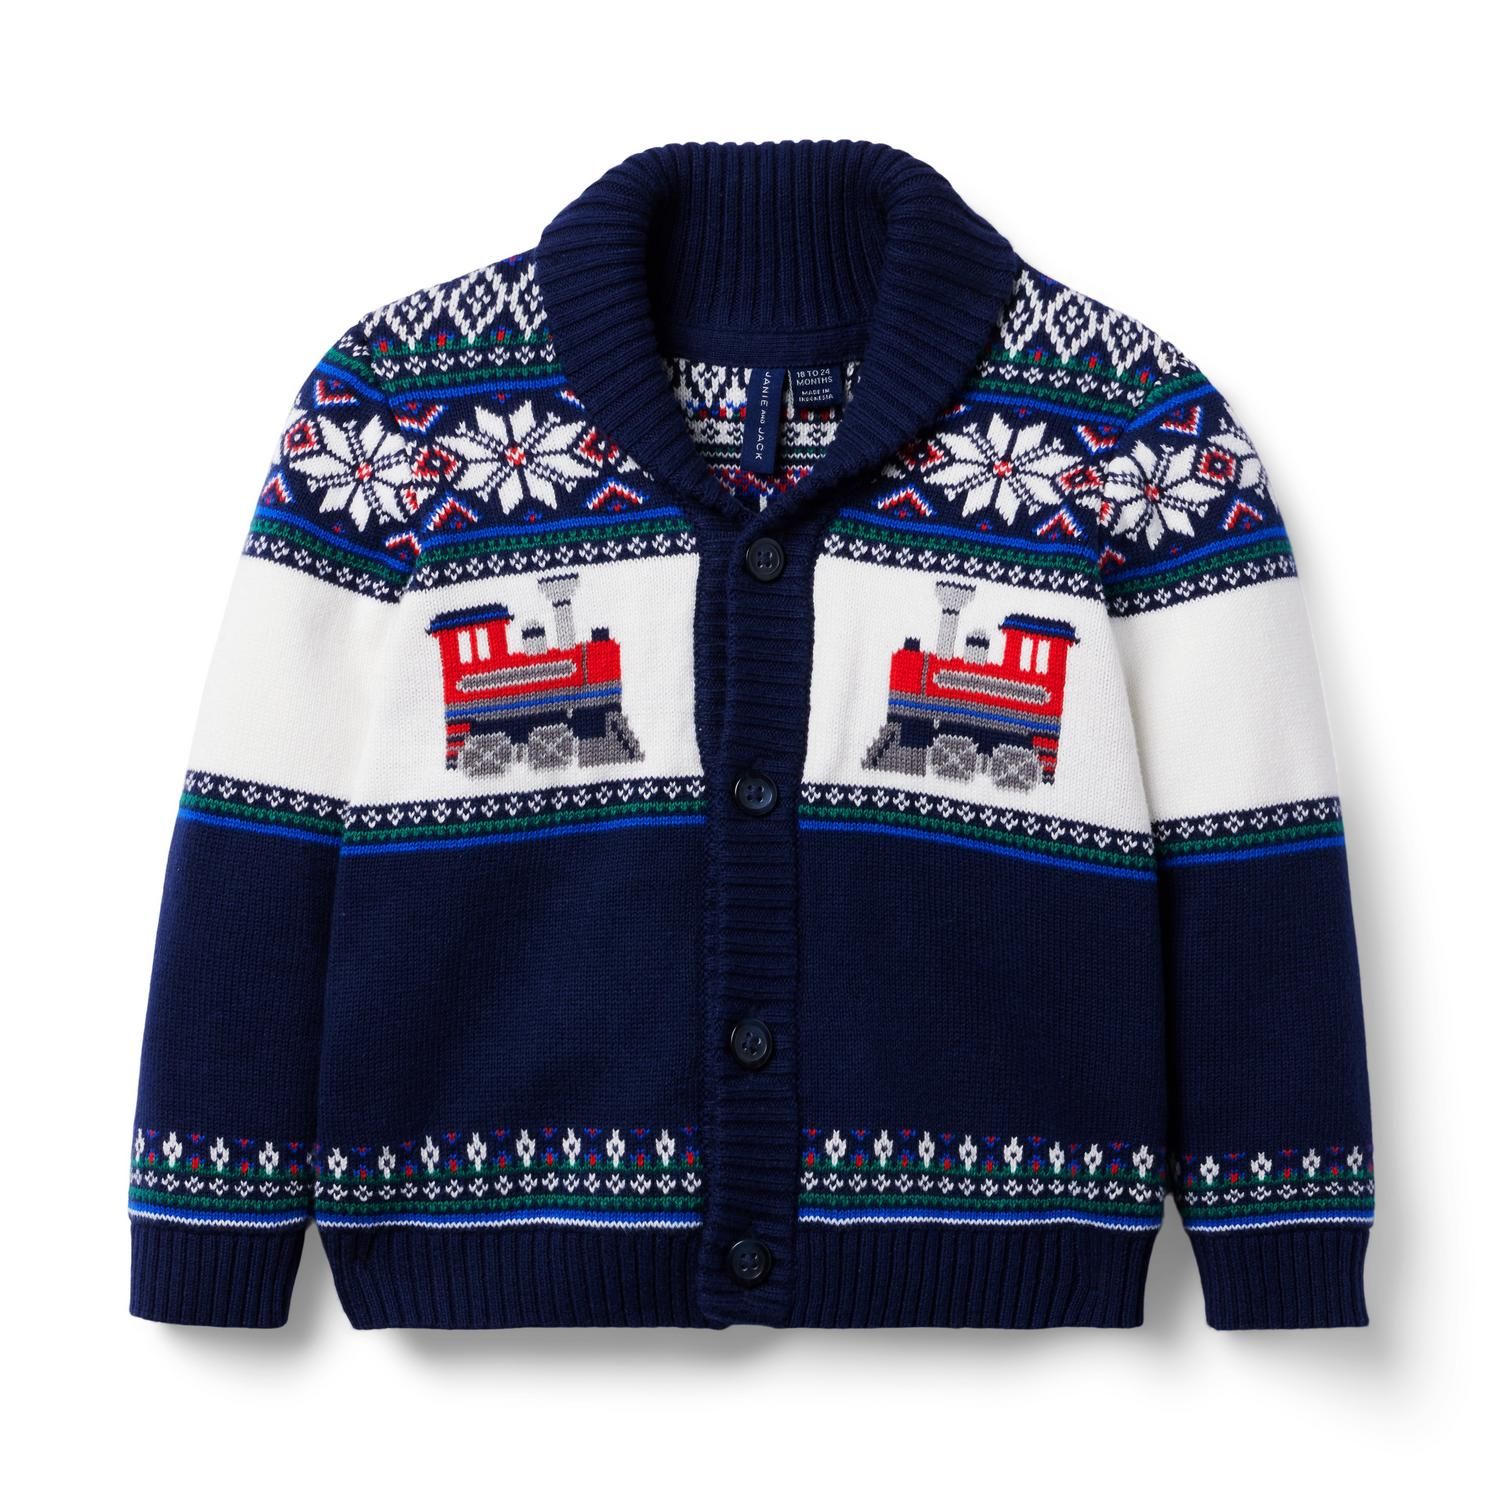 The Holiday Train Cardigan | Janie and Jack